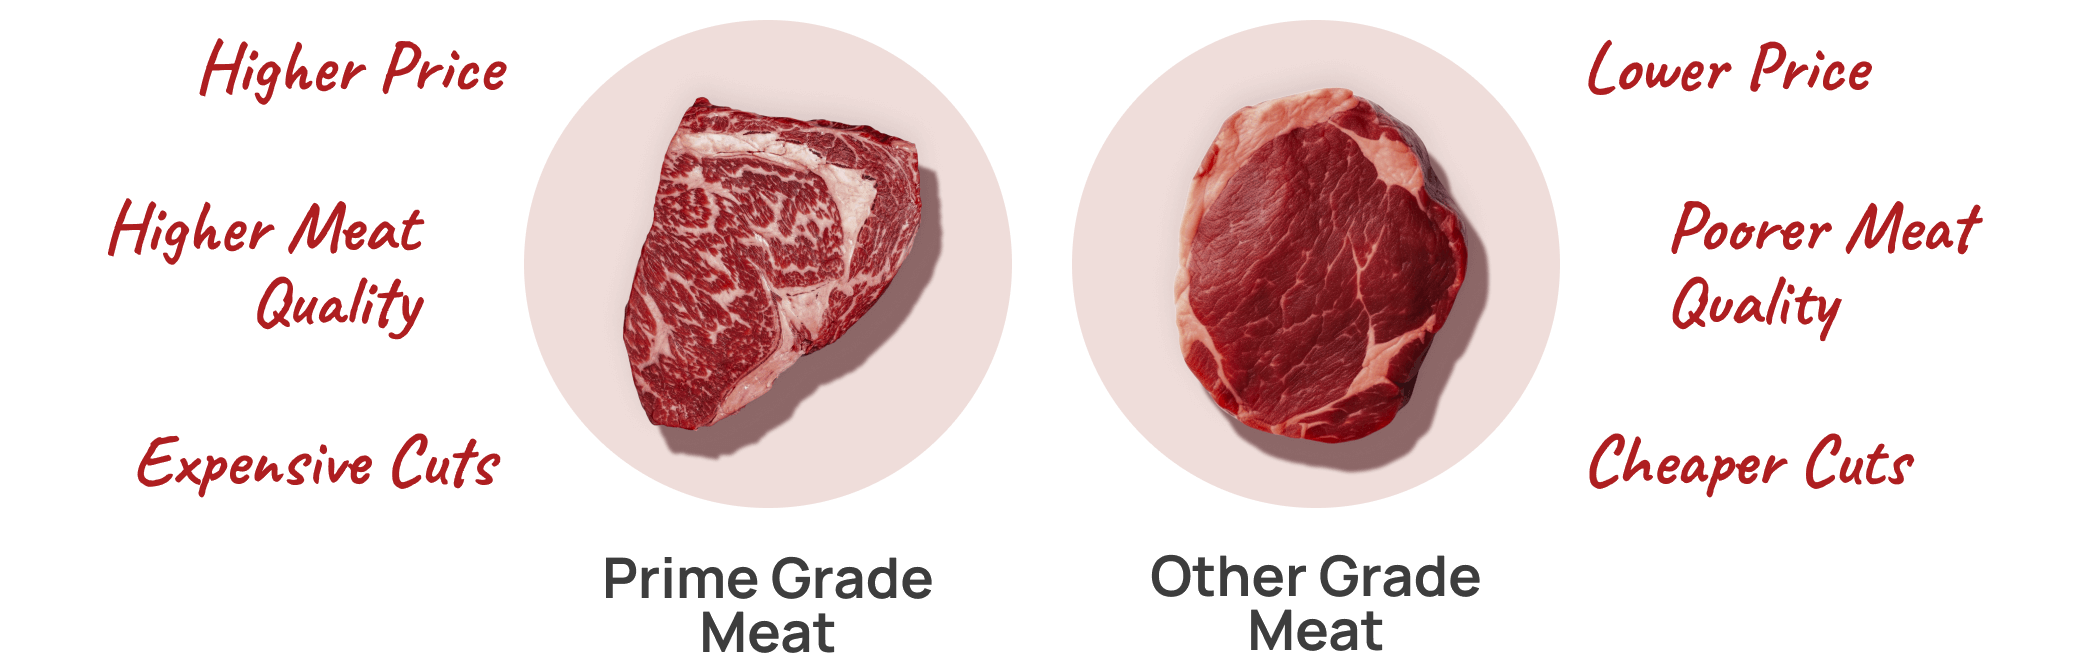 Prime and Other Grade Meat